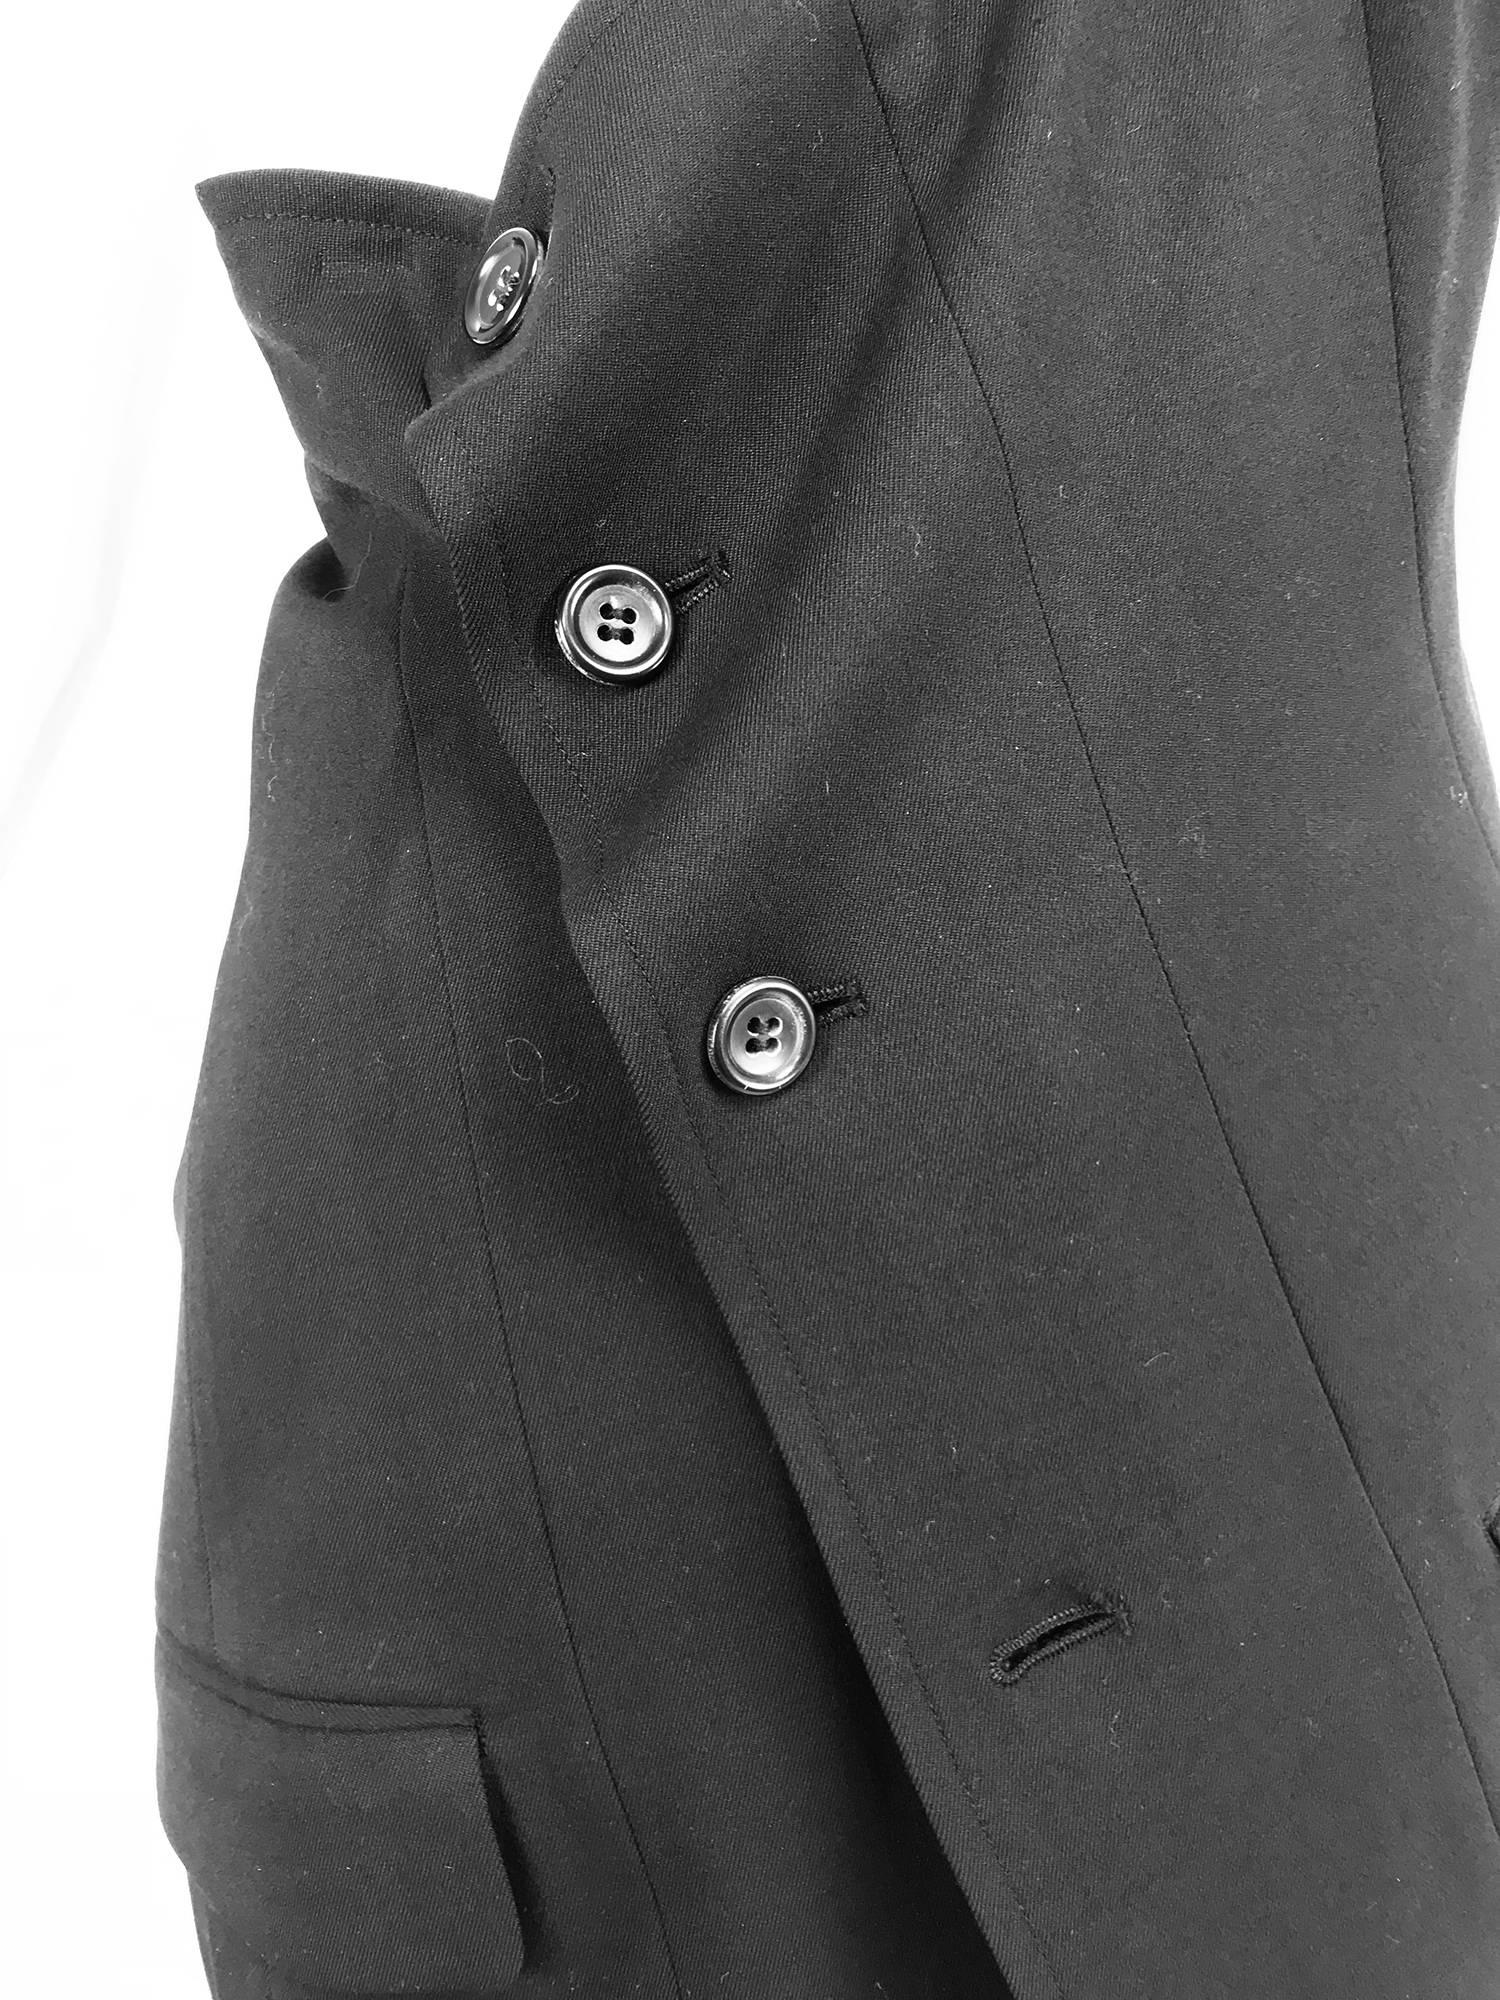 Comme des Garcons asymmetrical black wool one shoulder angled button front tunic...Side back gathered opening/pocket...Fully lined...Angled button closure with flap pockets at either hip front...One cap shoulder...Marked size Medium about a size